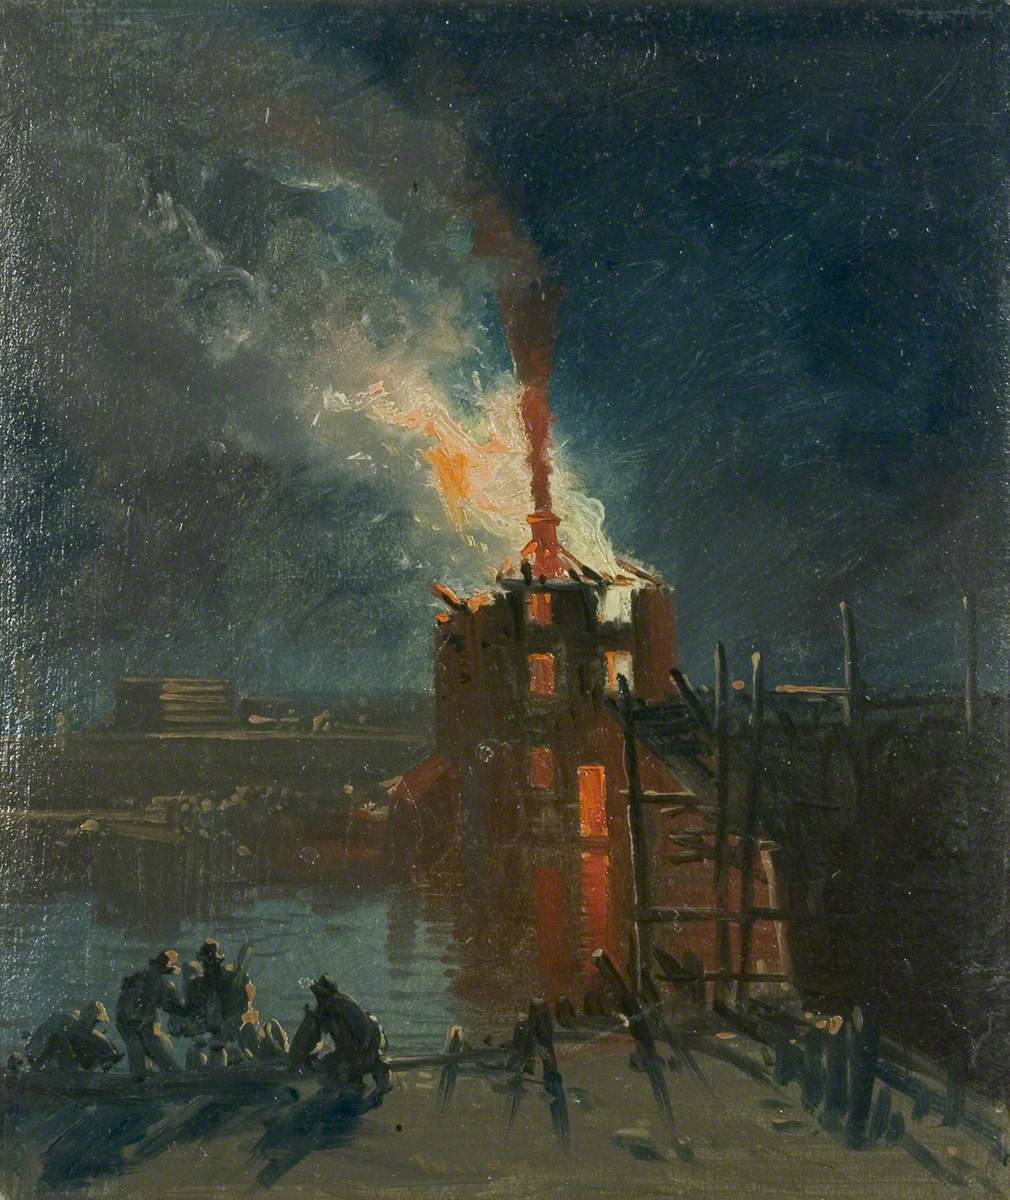 Bristol Riots: Warehouse from Wapping